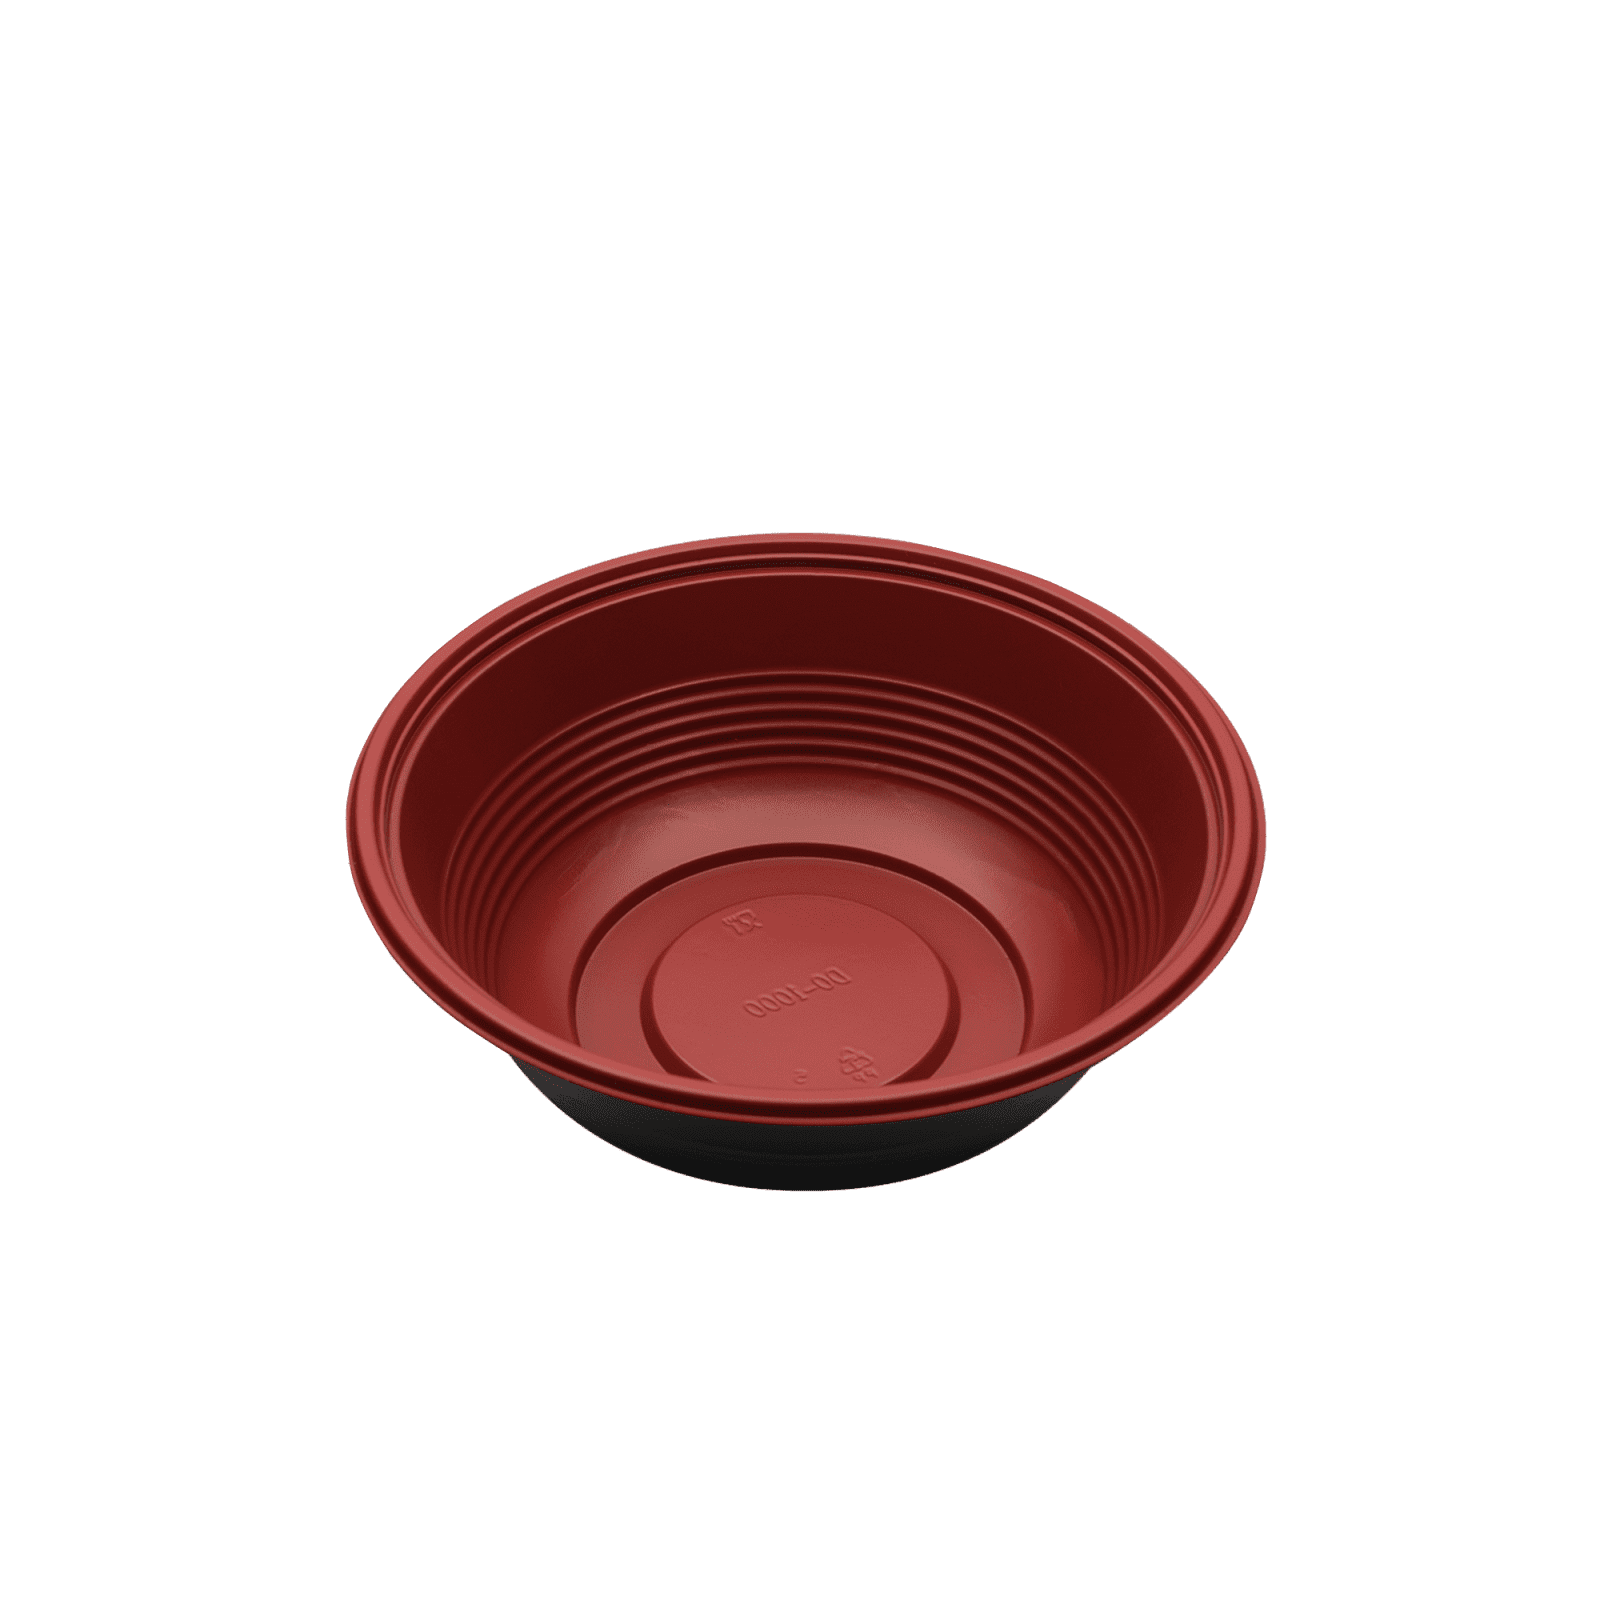 Enpak microwave to go donburi bowls with clear lids 1000ml DO-1000